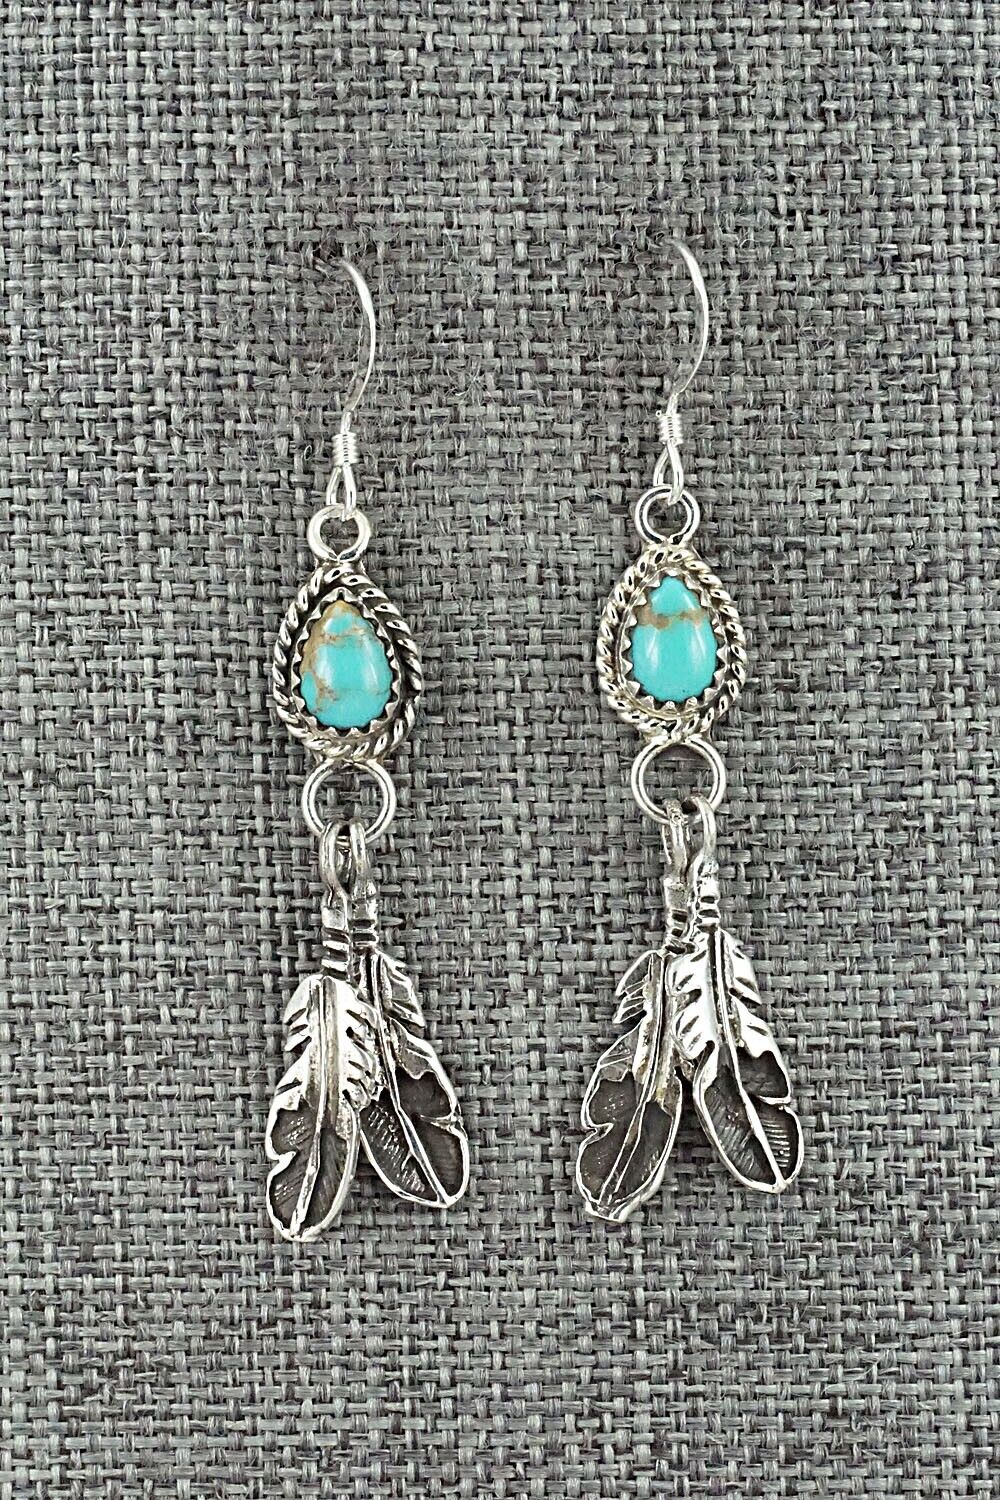 Turquoise & Sterling Silver Earrings - Sharon McCarthy